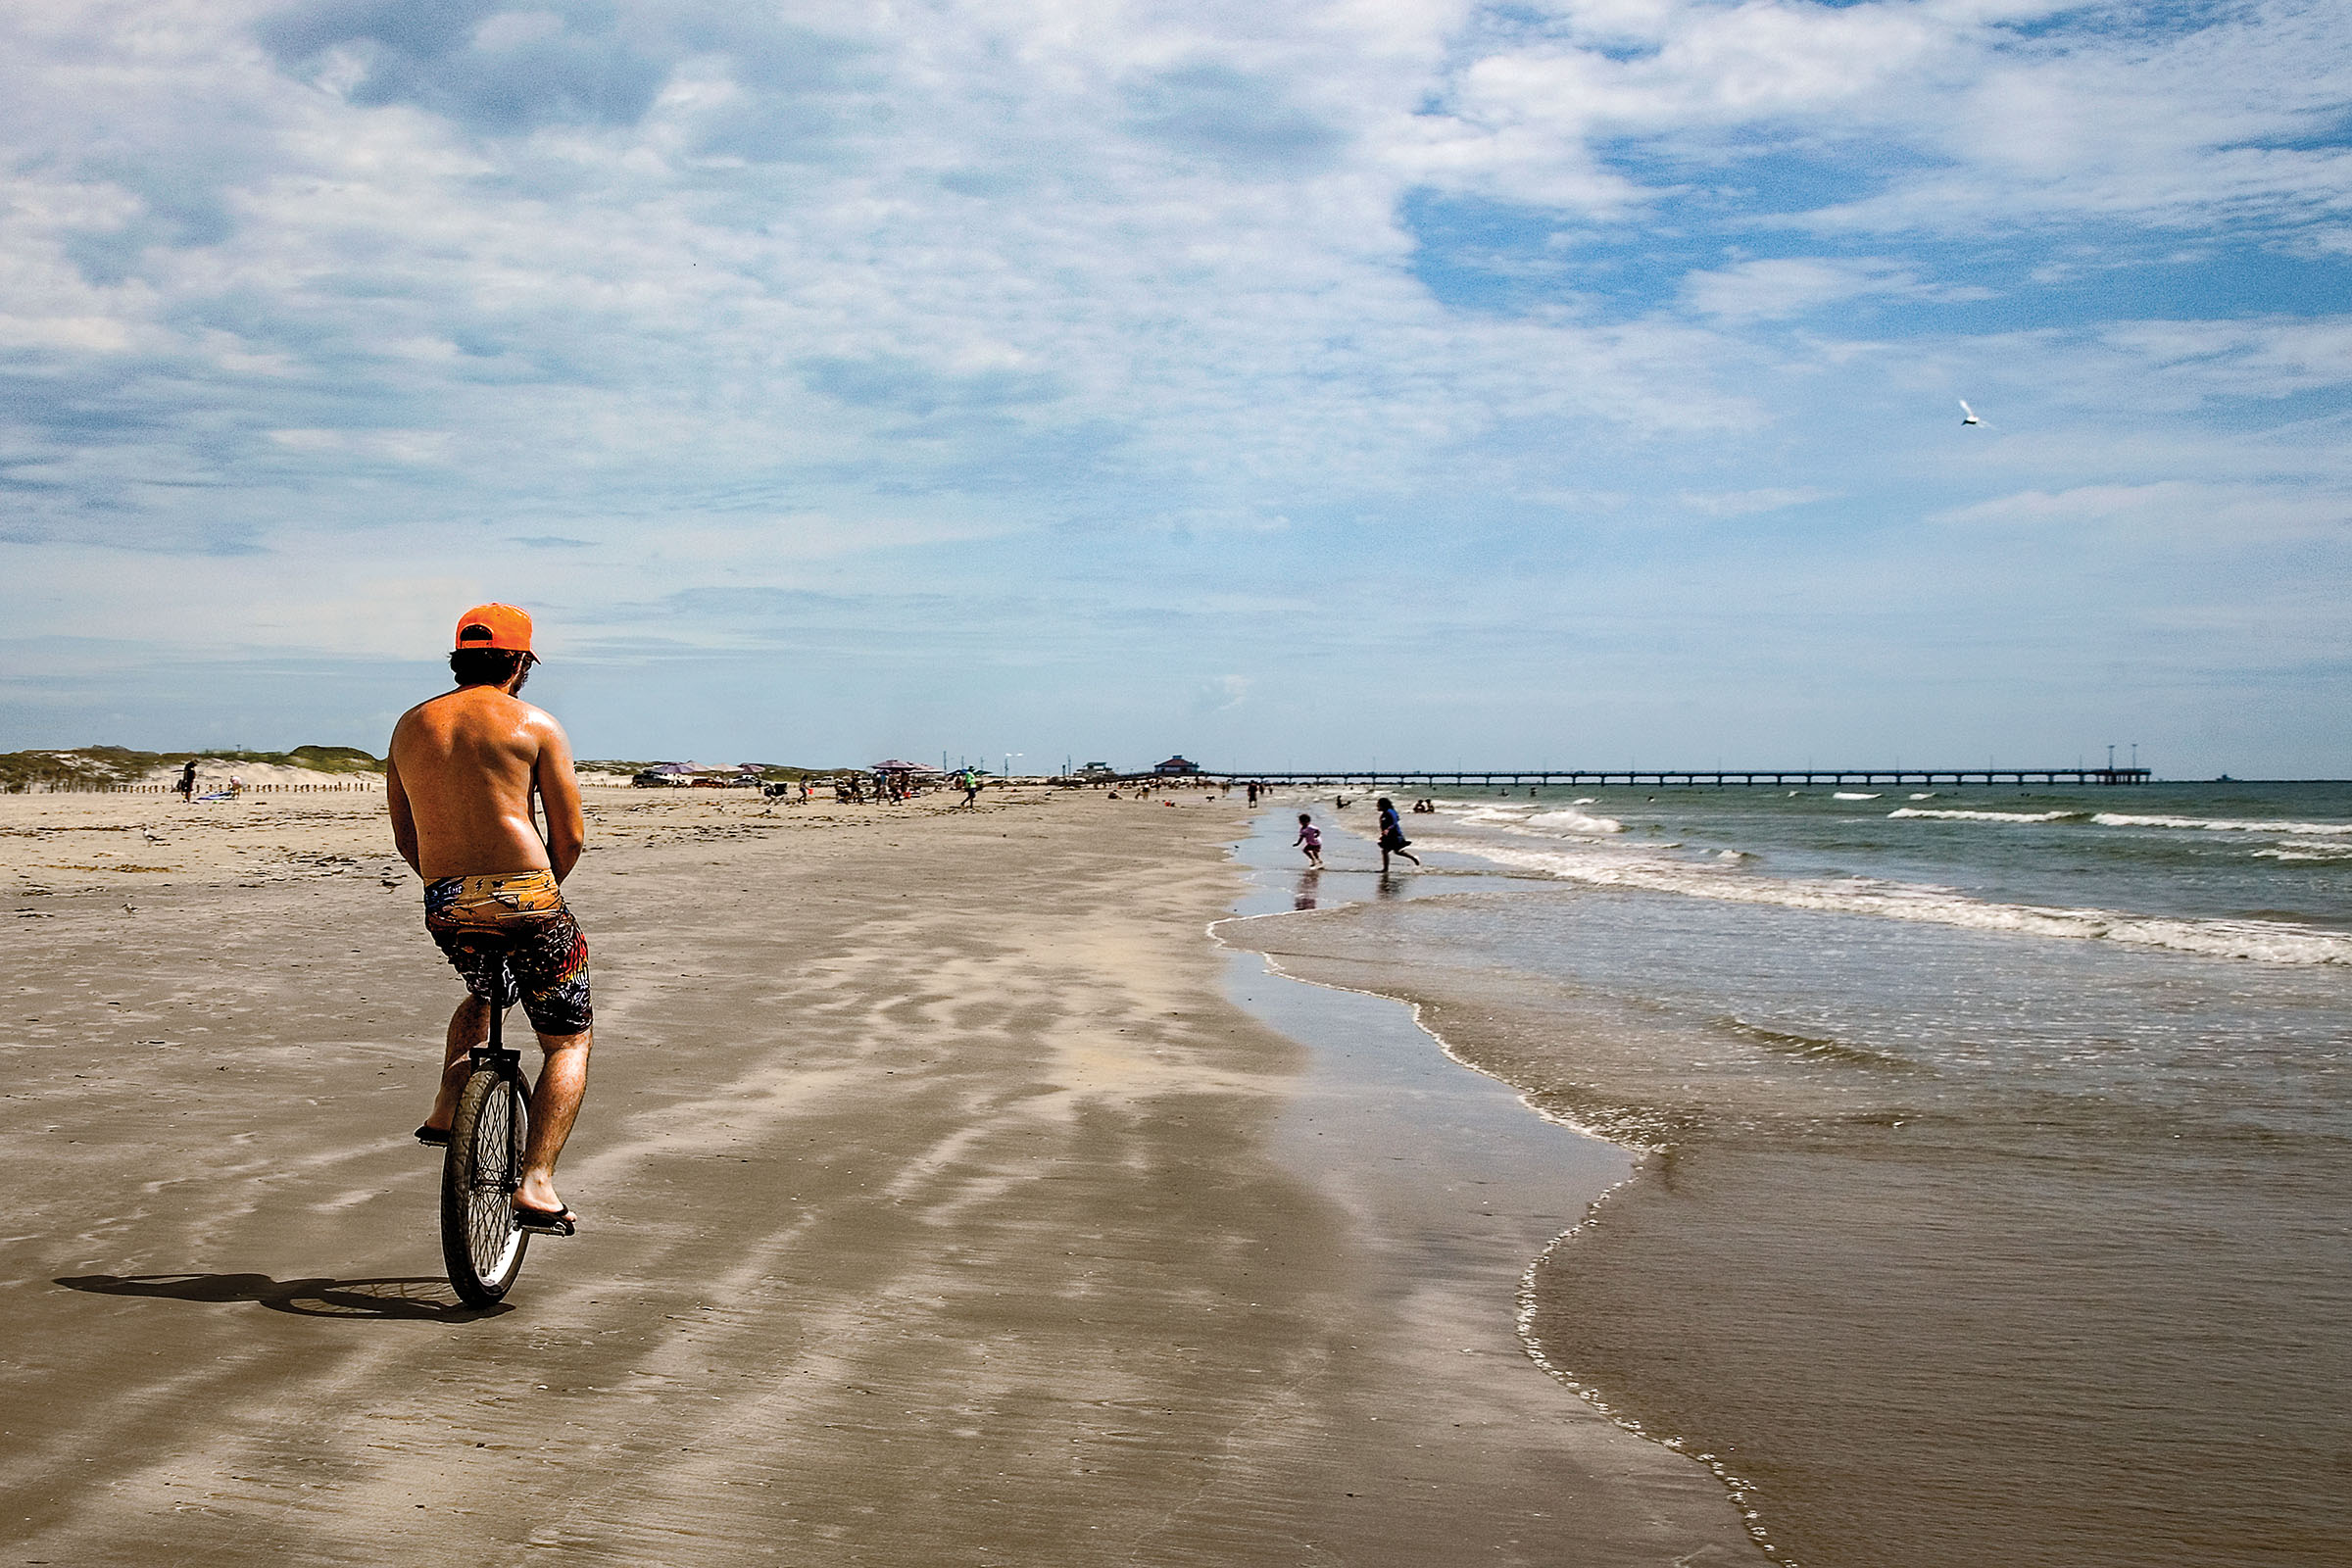 A unicyclist pedals along the hard-packed sand along the seashore under blue sky